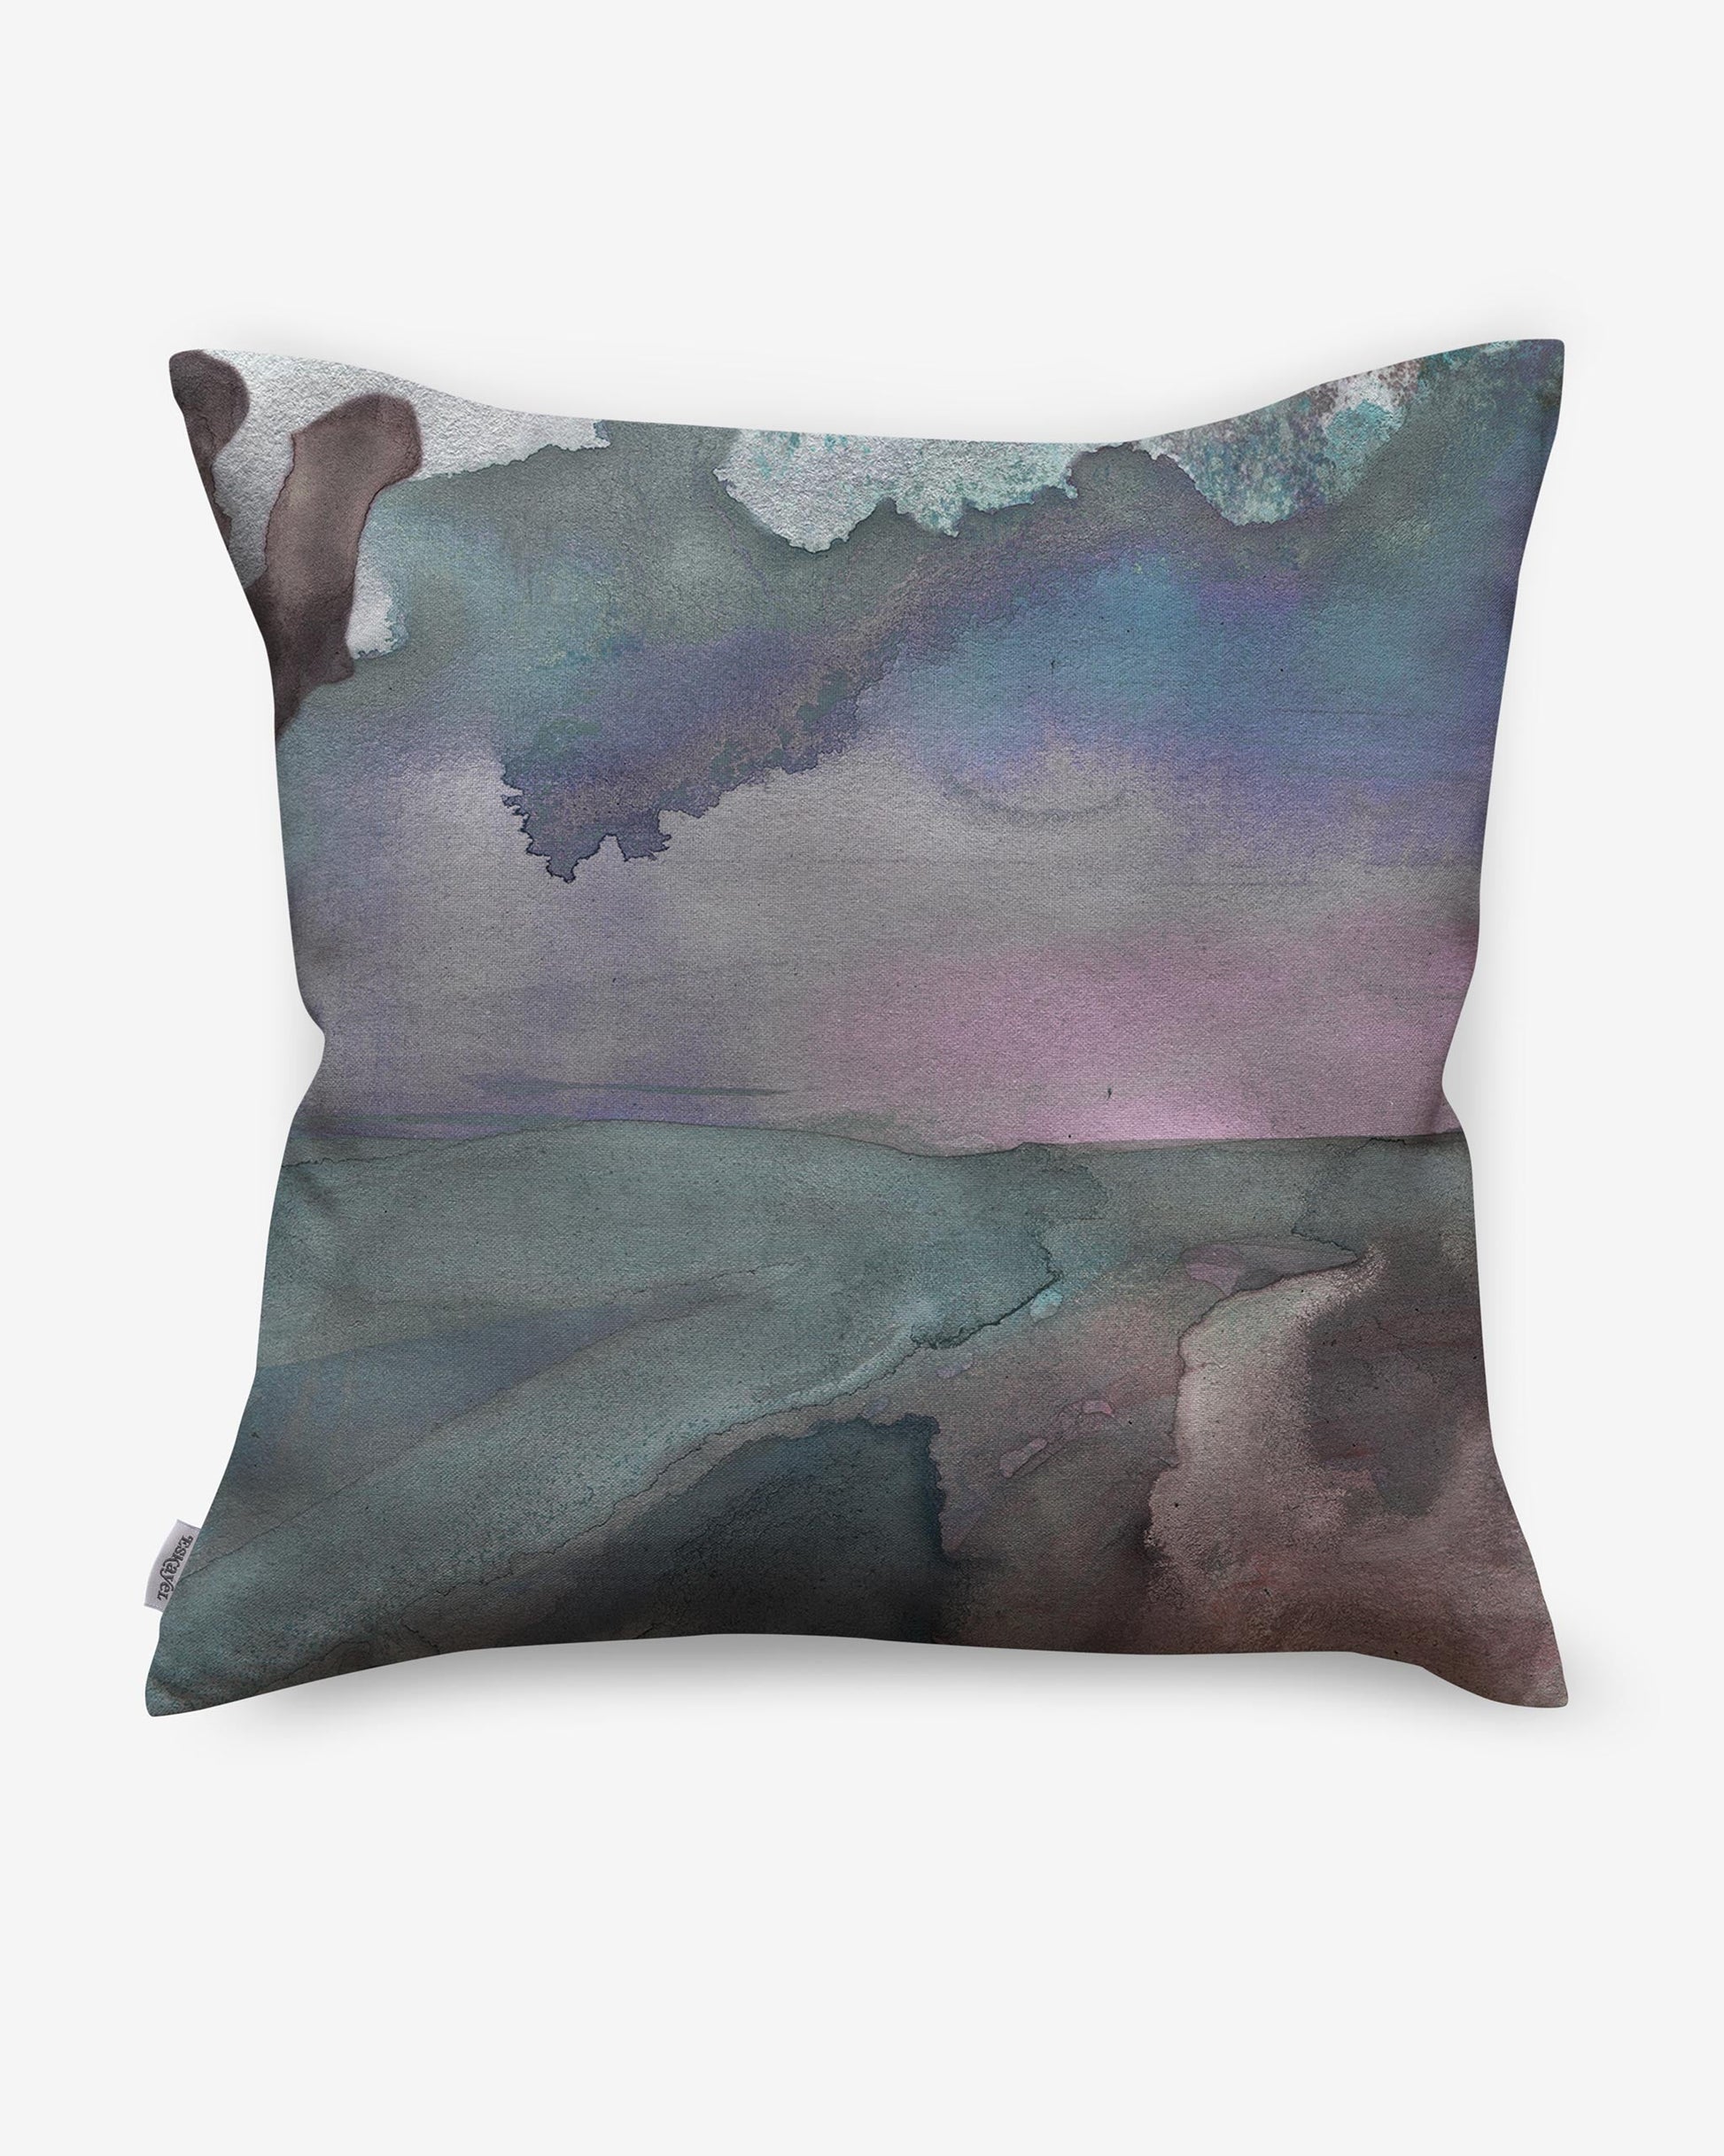 A Palmeraie Pillow with a watercolor painting of the ocean